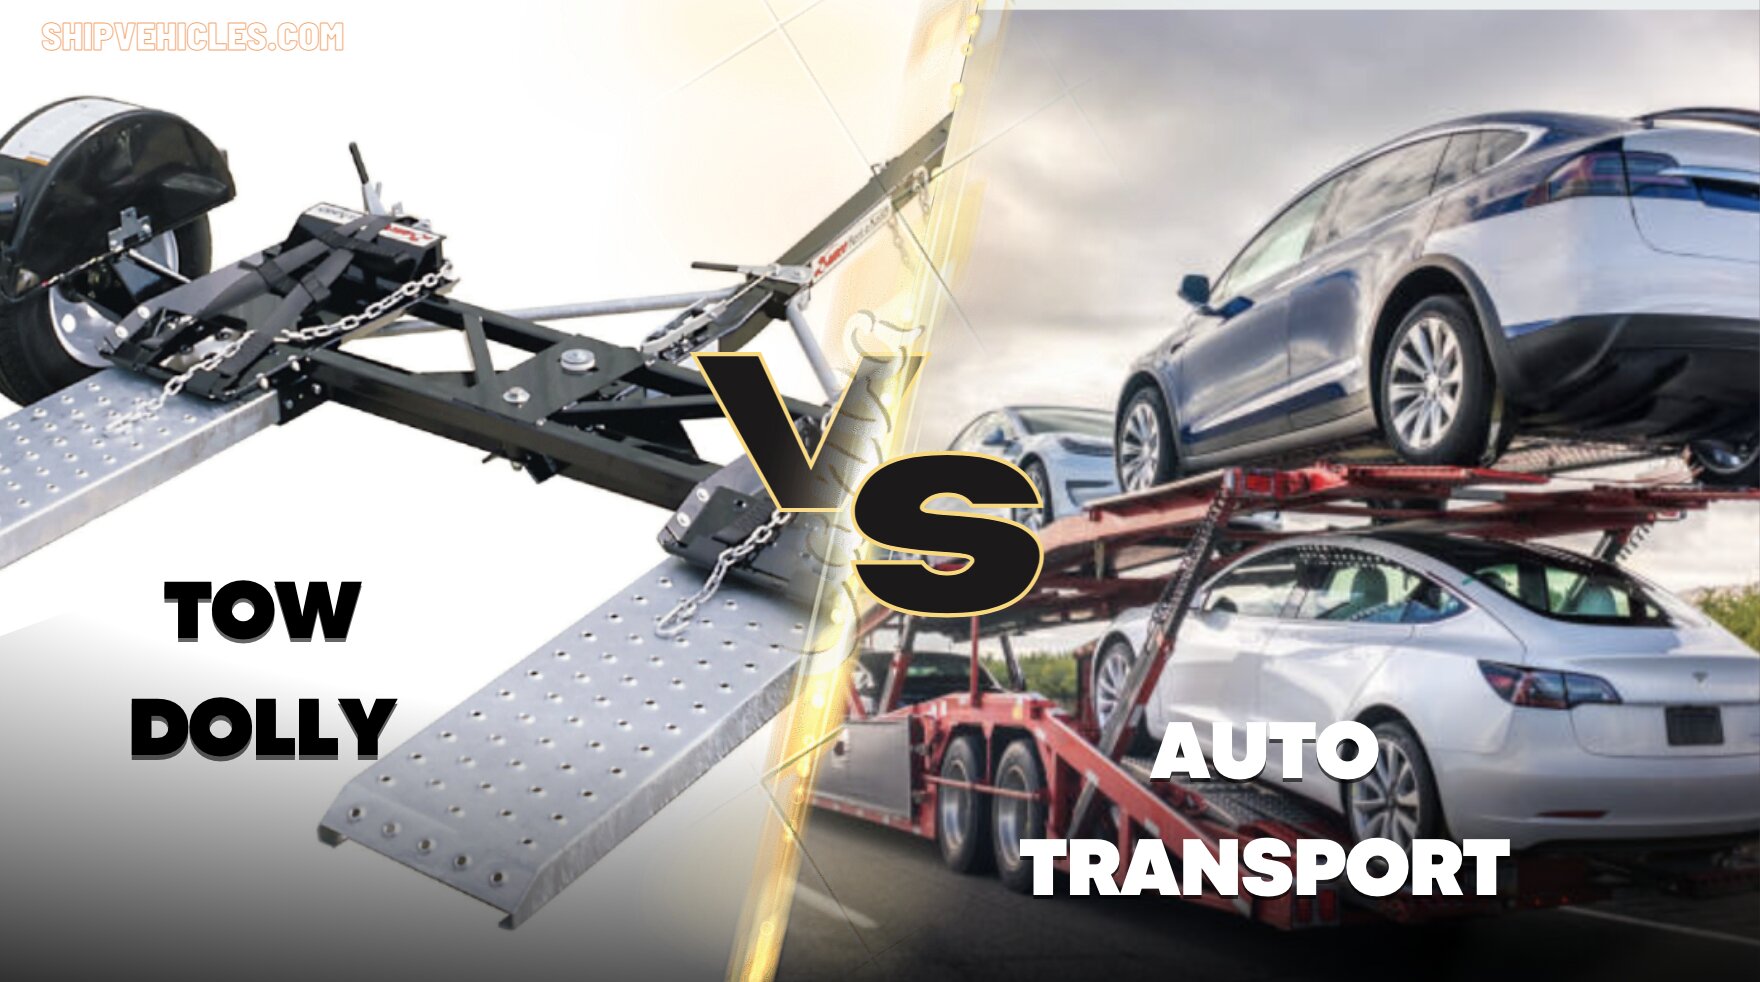 Auto Transport vs Tow Dolly: Which is the Best Option for Your Vehicle?